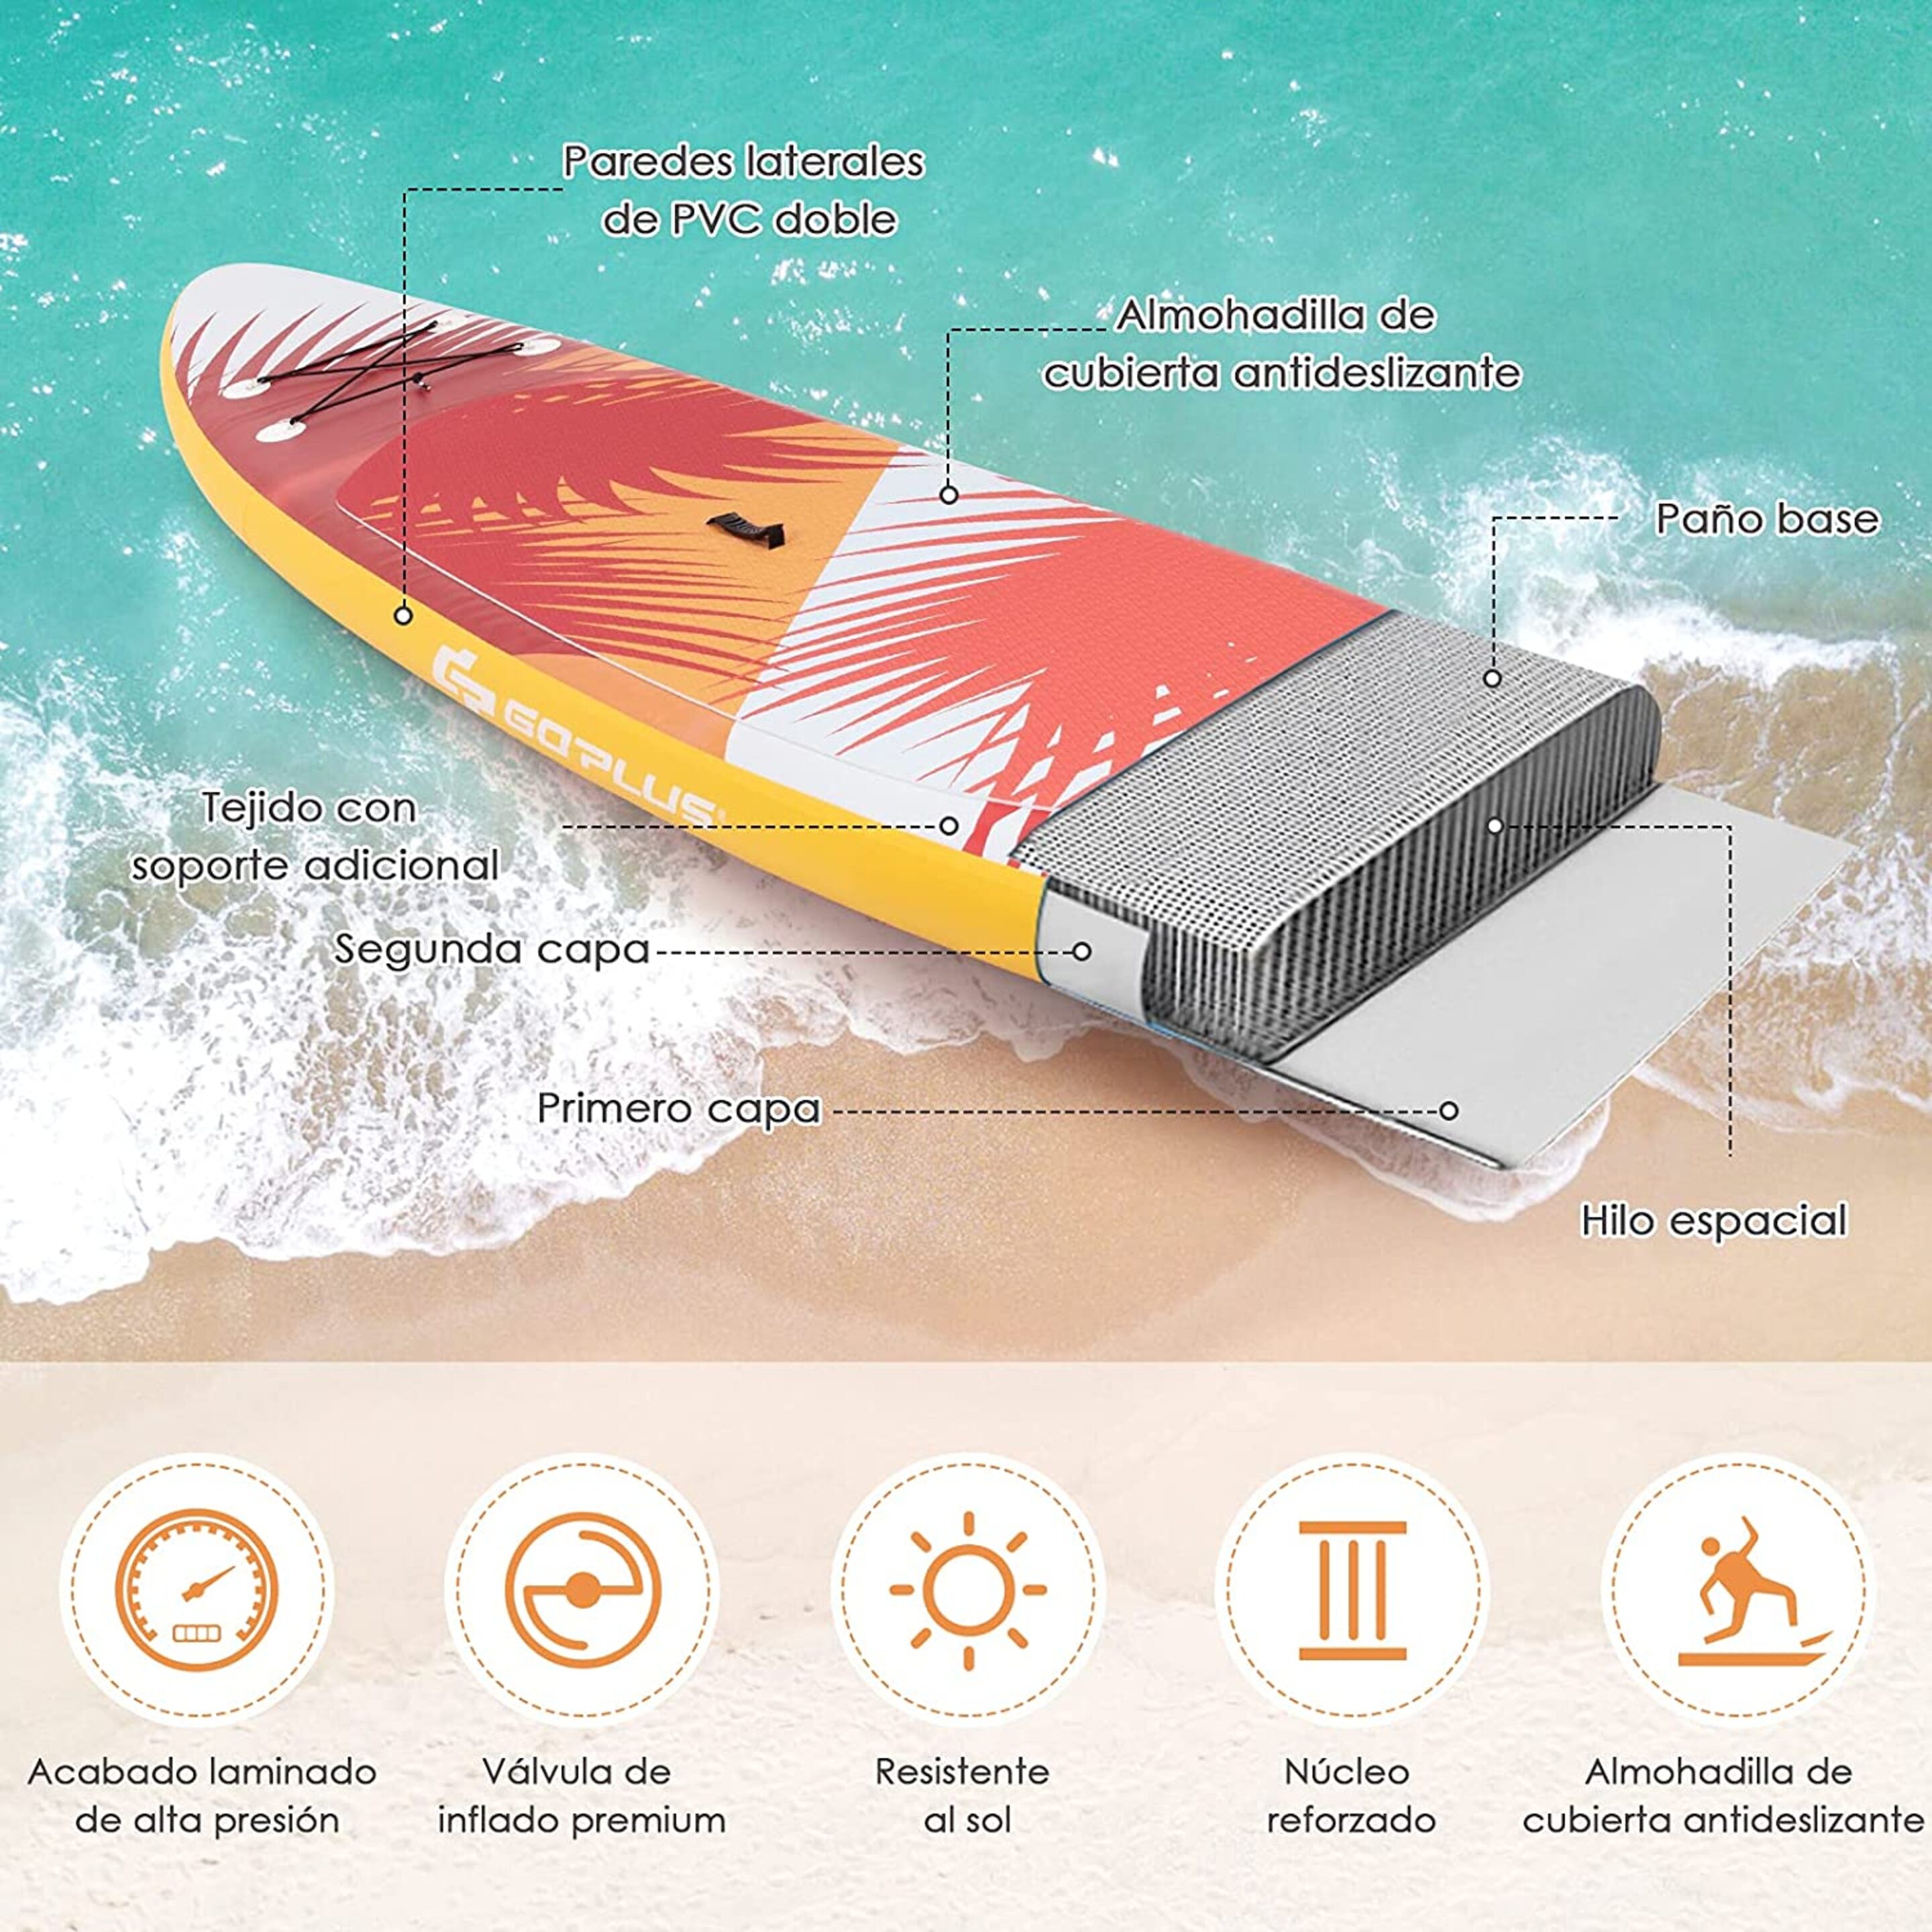 Tabla De Paddle Inflable  320 X 76 X 15 Cm  Sup Board Costway